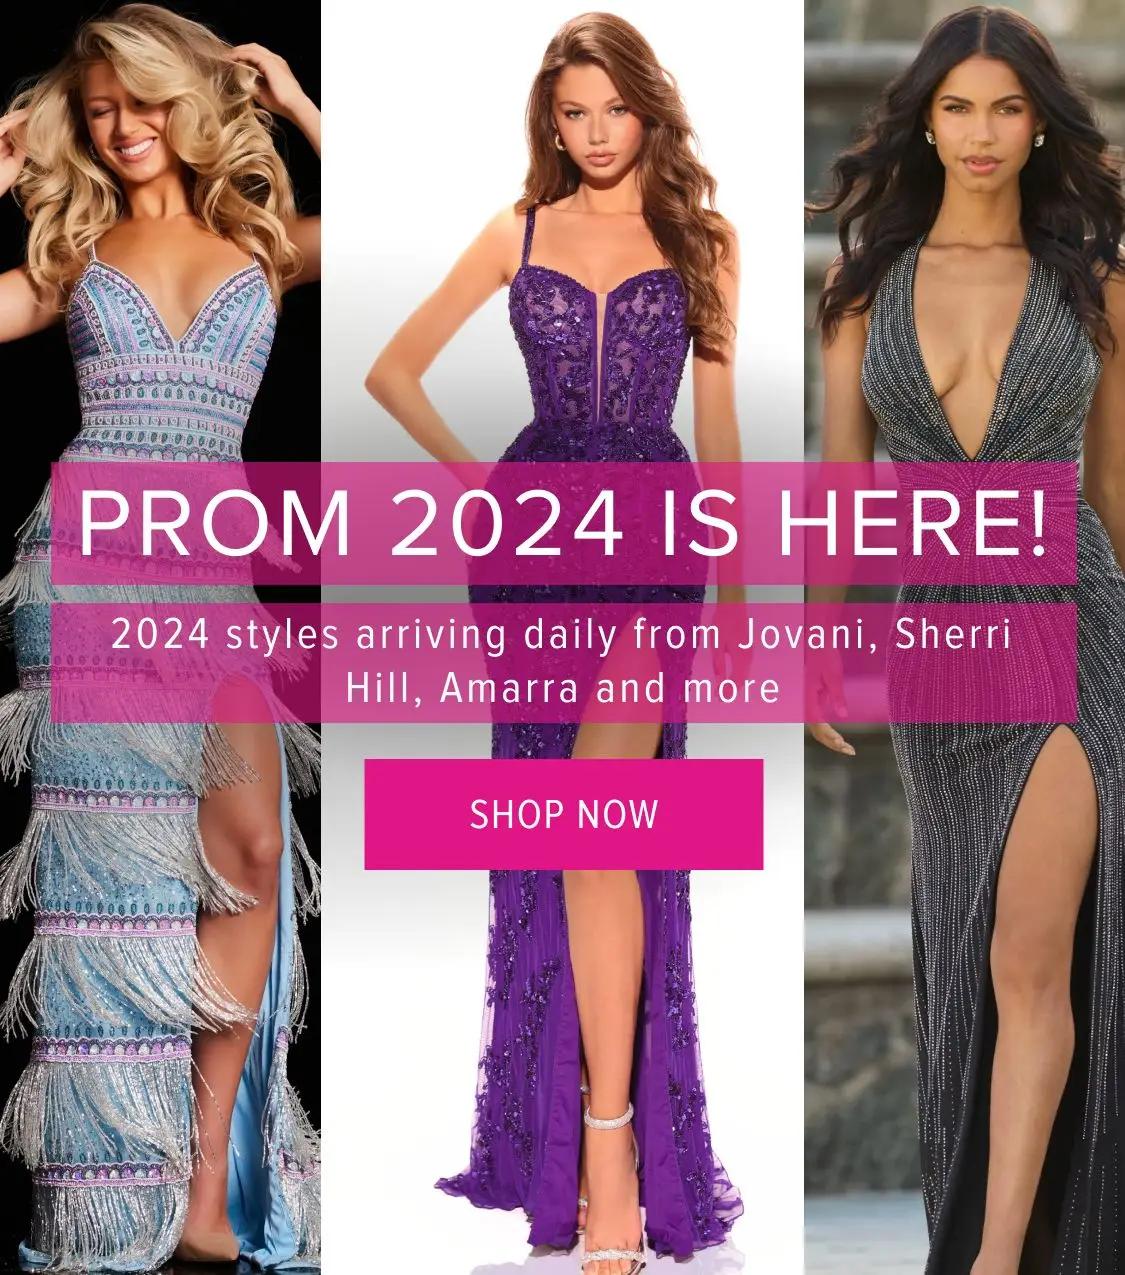 Prom 2024 dresses from top designers like Jovani, Sherri Hill, Amarra and more at Whatchamacallit